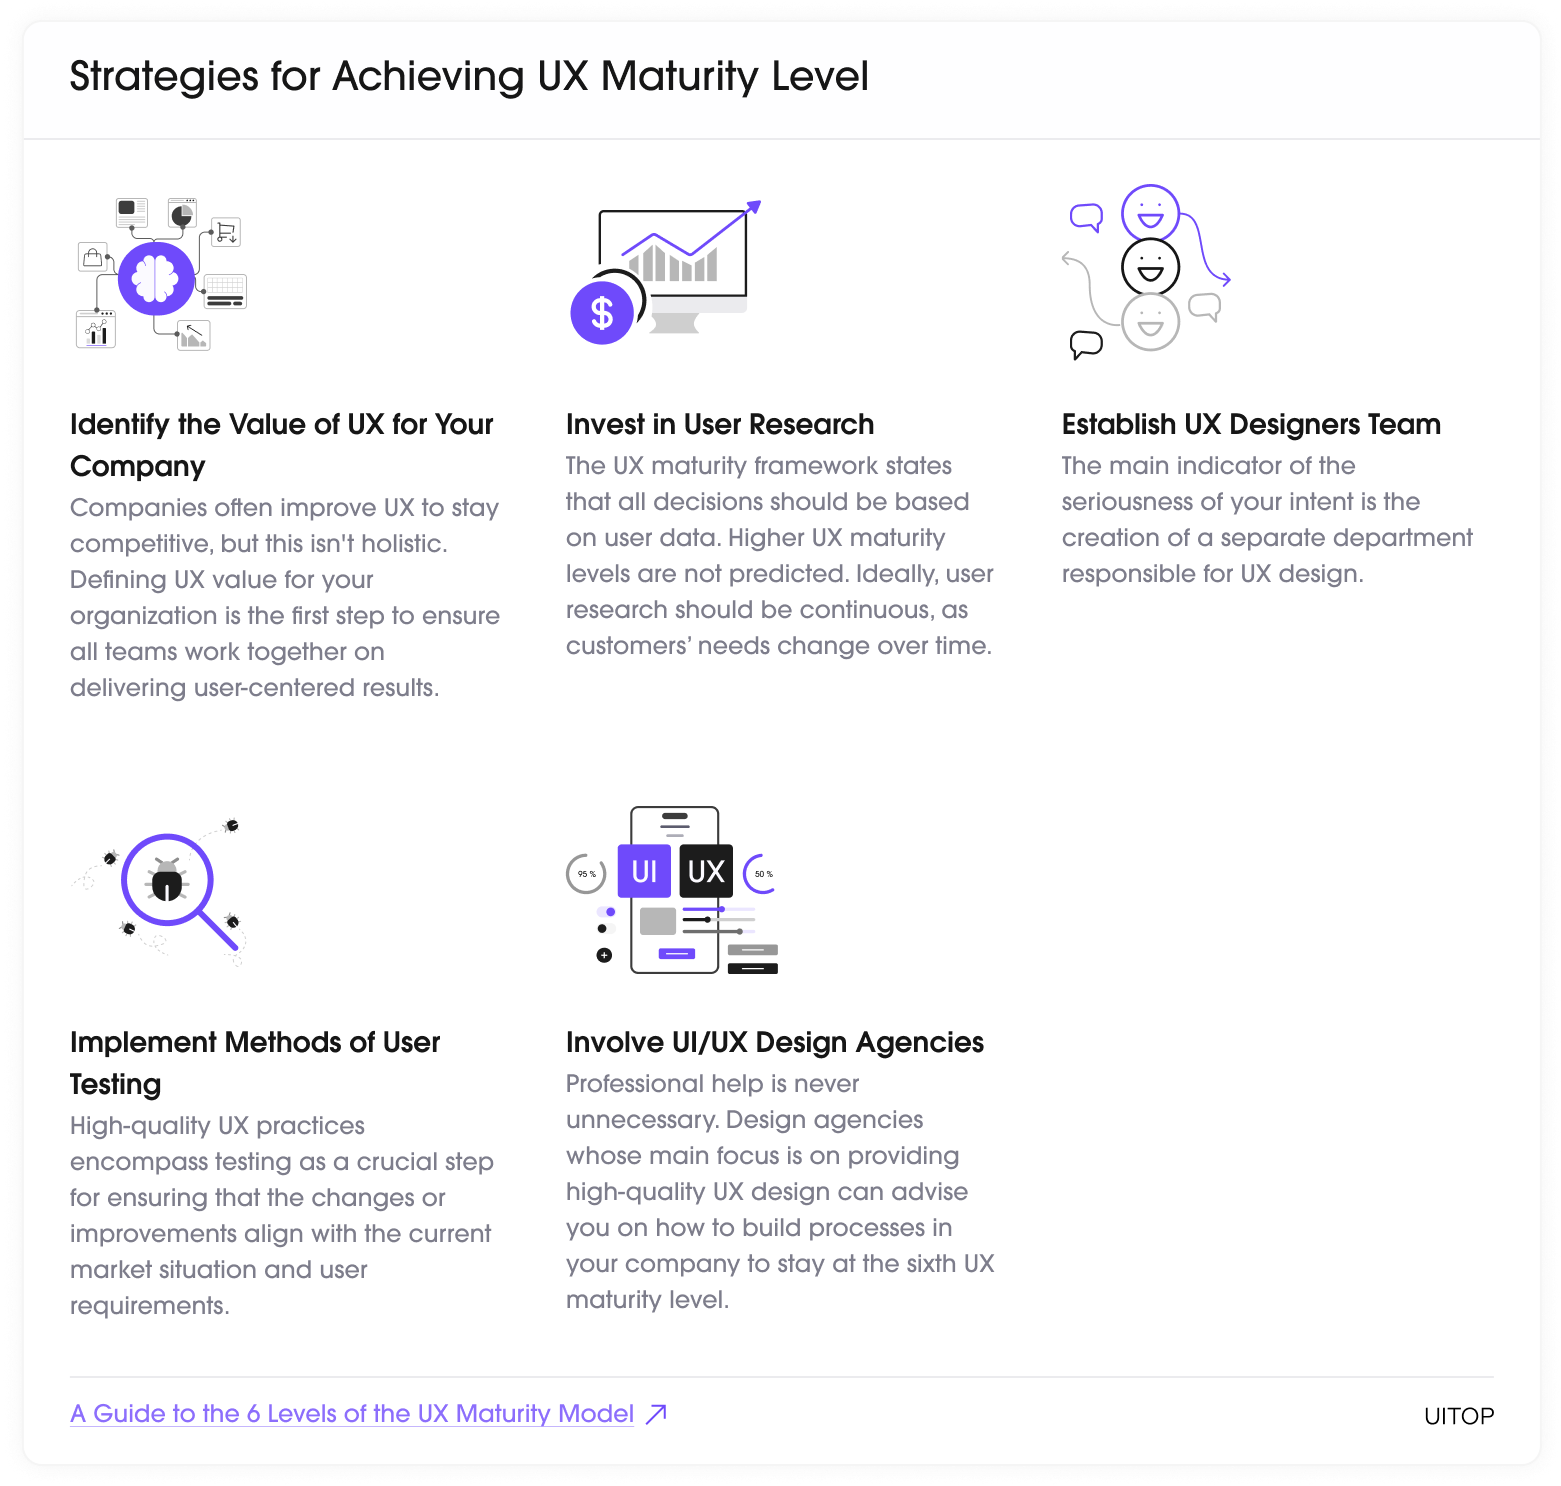 Strategies for Achieving UX Maturity Level